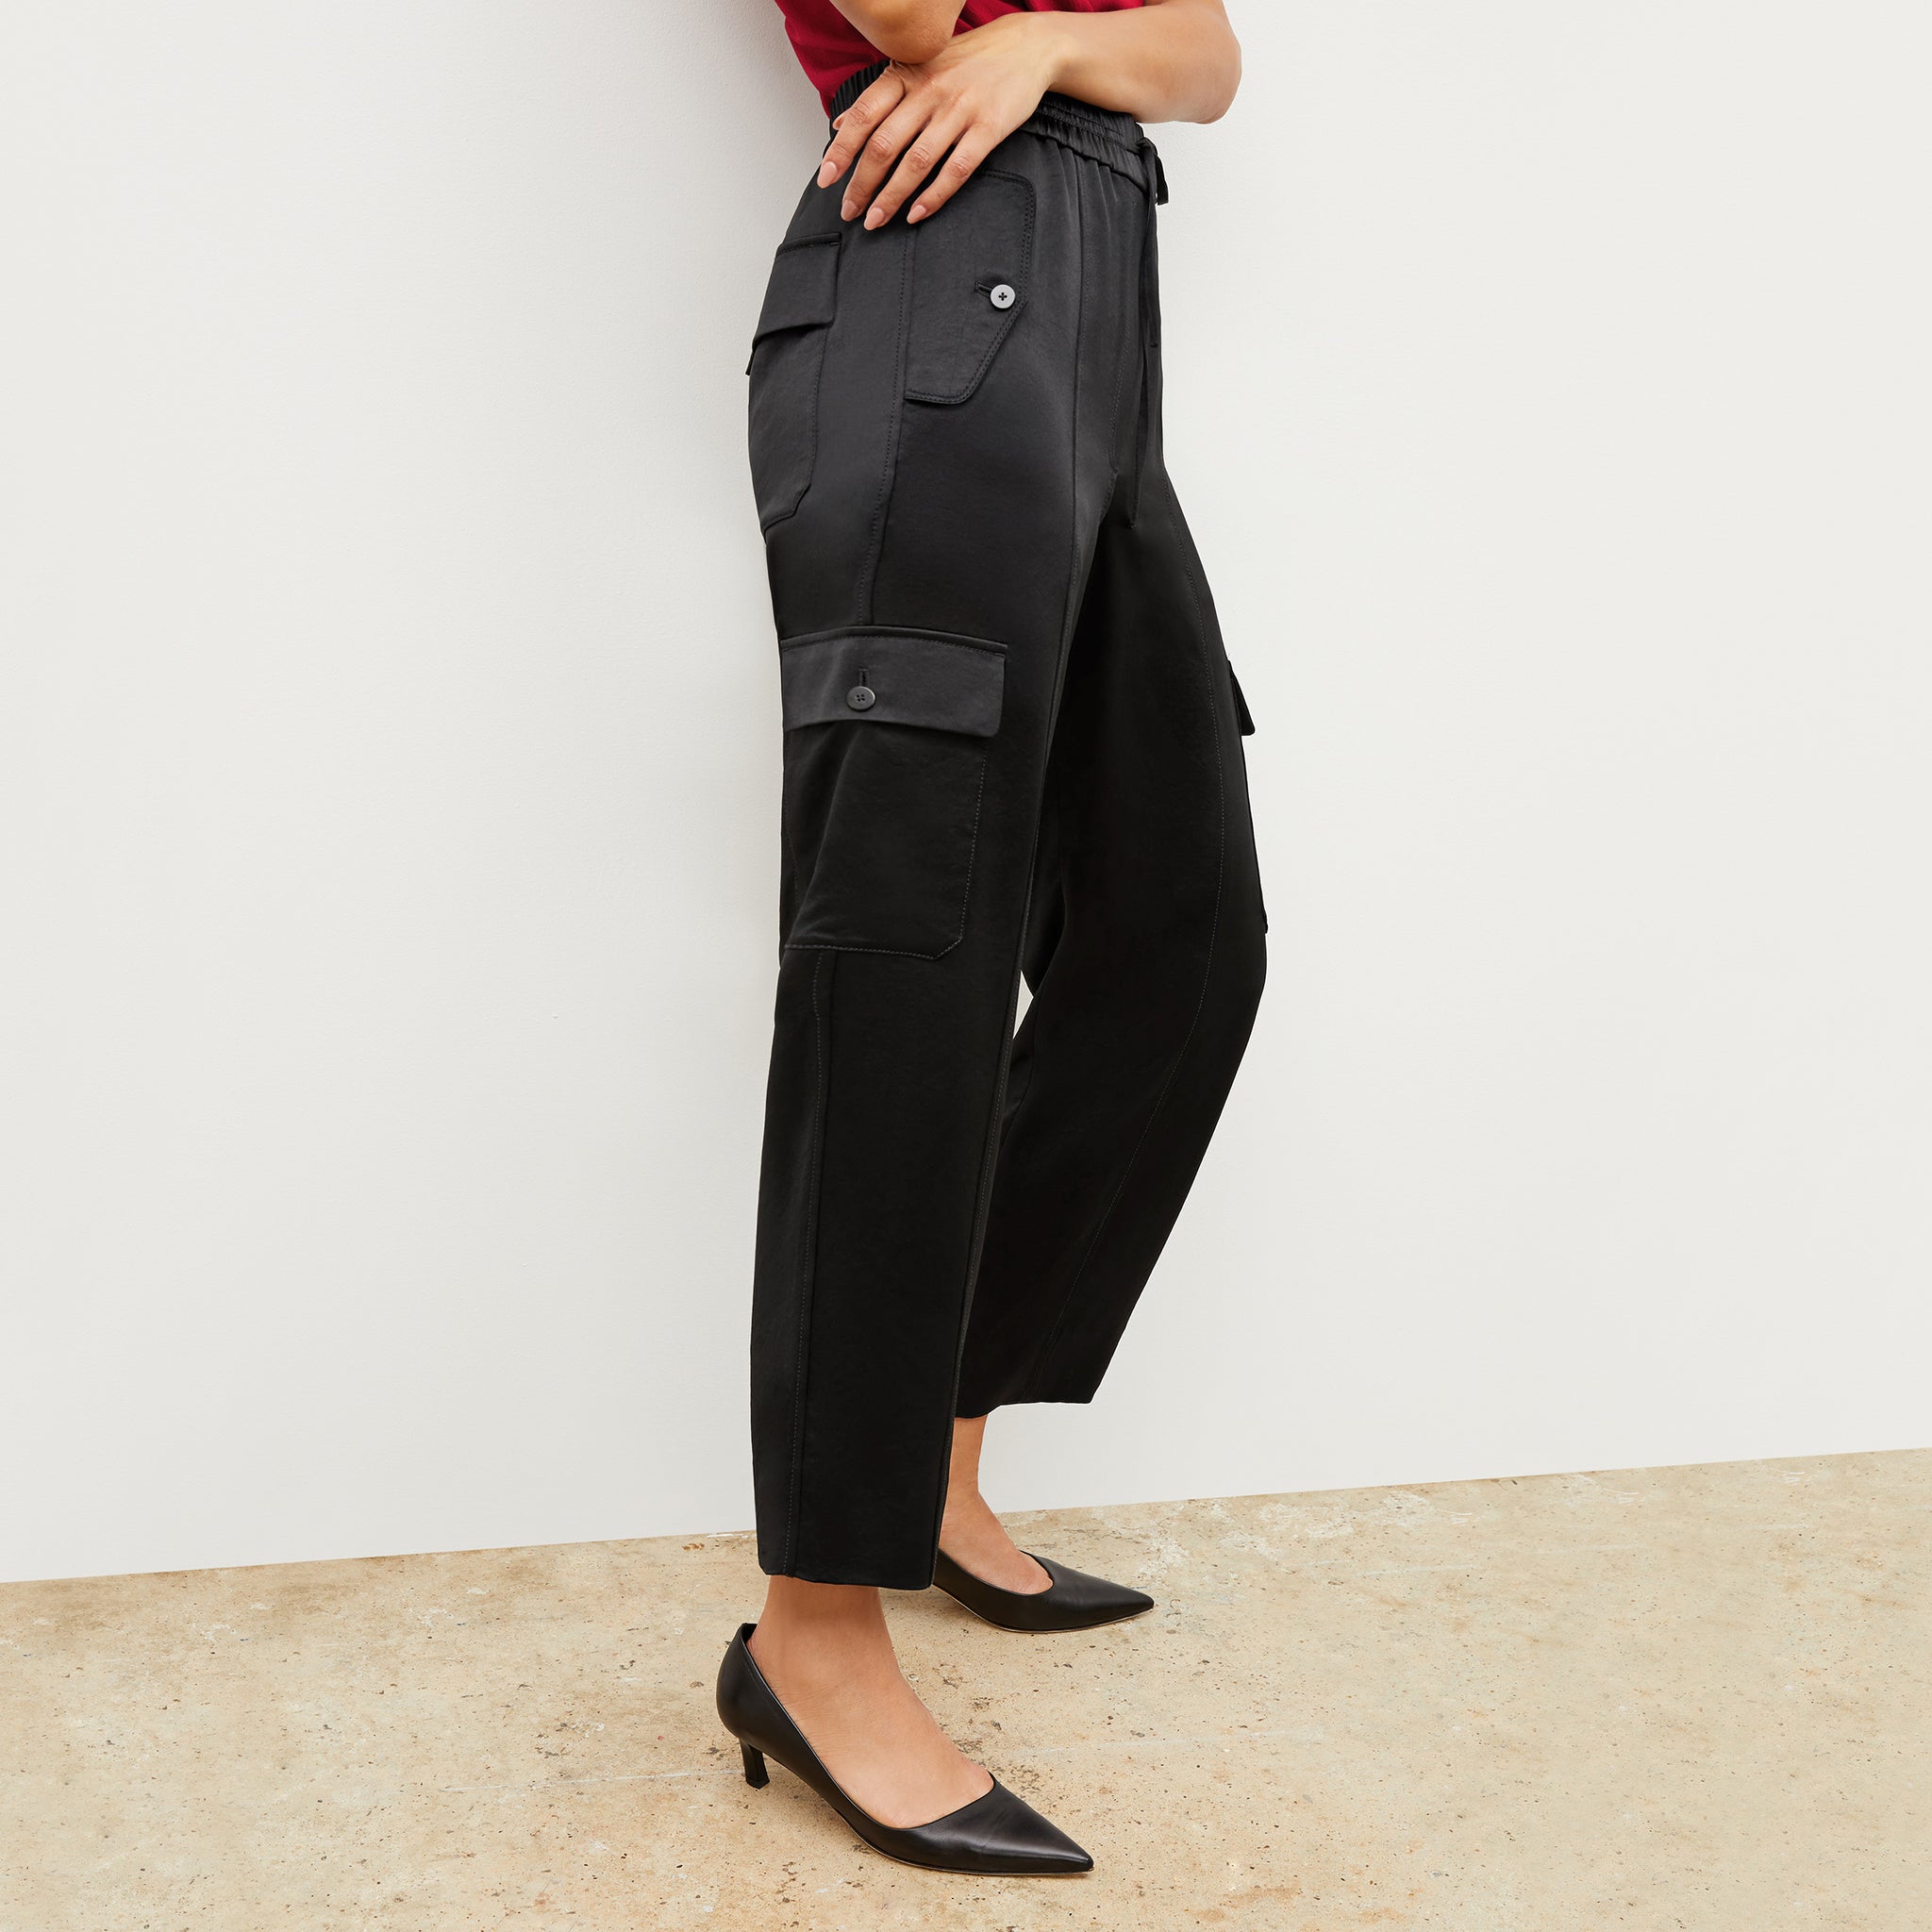 Image of a woman wearing the Gianna Pant in Black